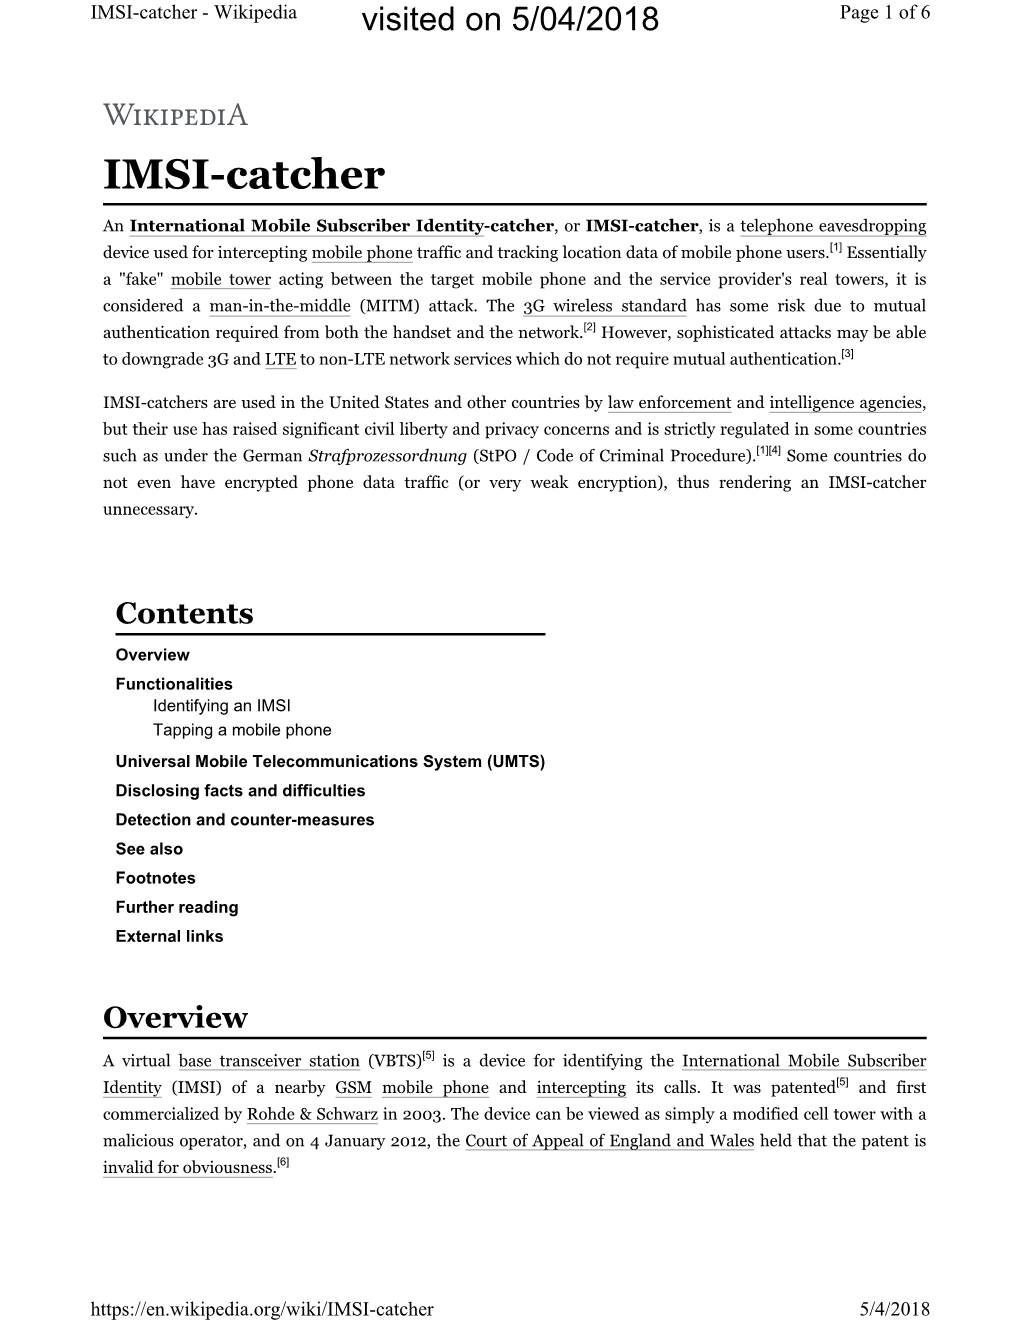 IMSI-Catcher -Wikipedia Visited on 5/04/2018 Page 1 of 6